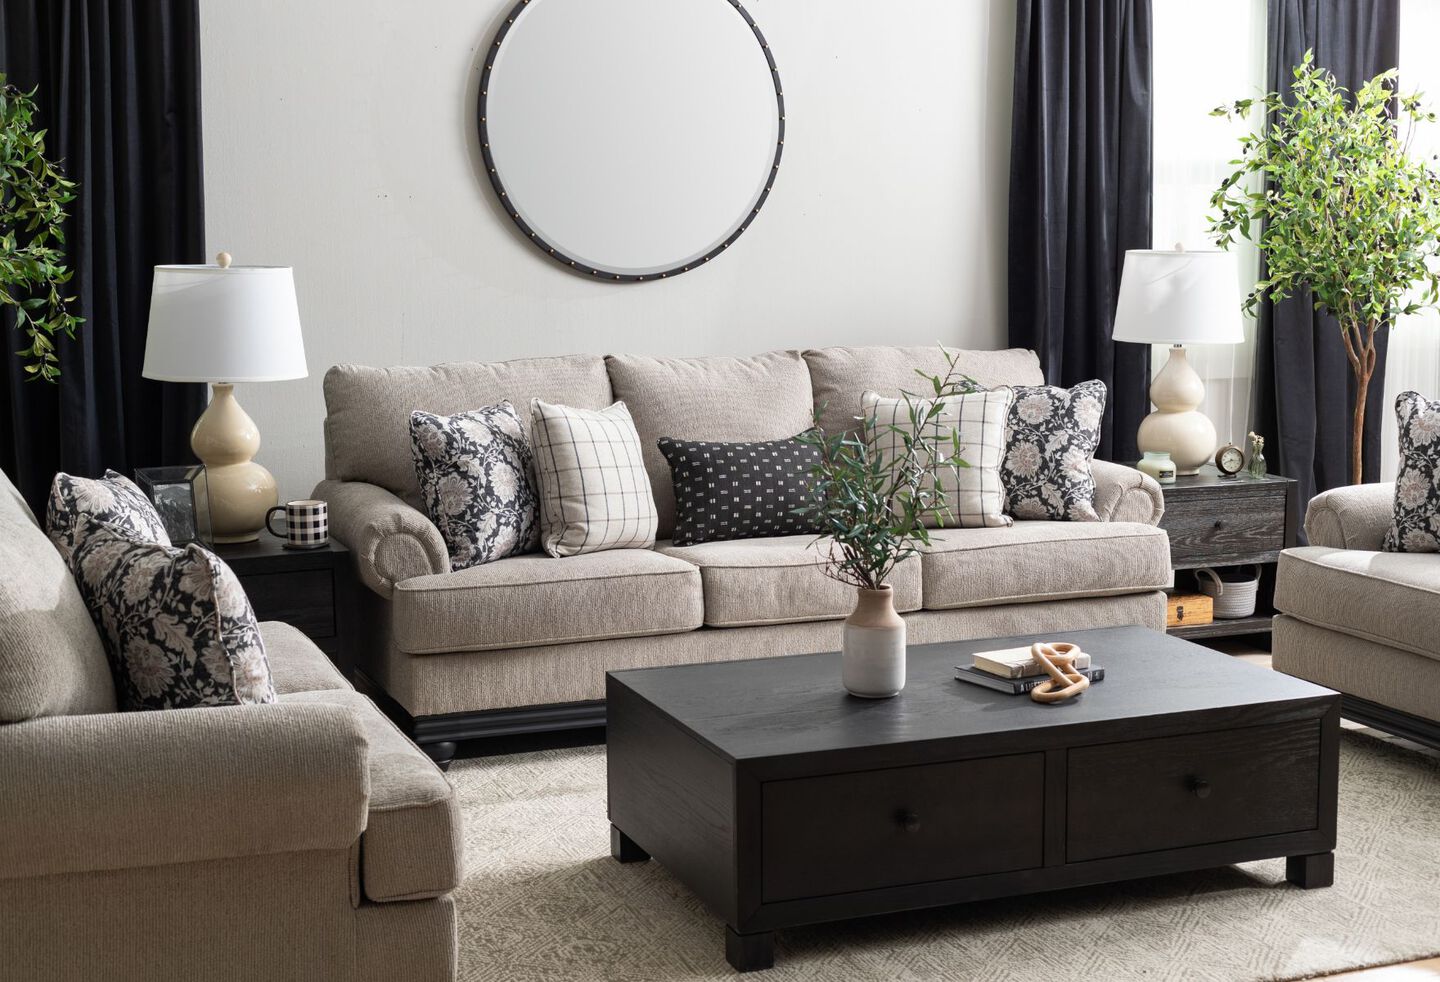 Living room with light grey couch and loveseat, black coffee table, and two black side tables